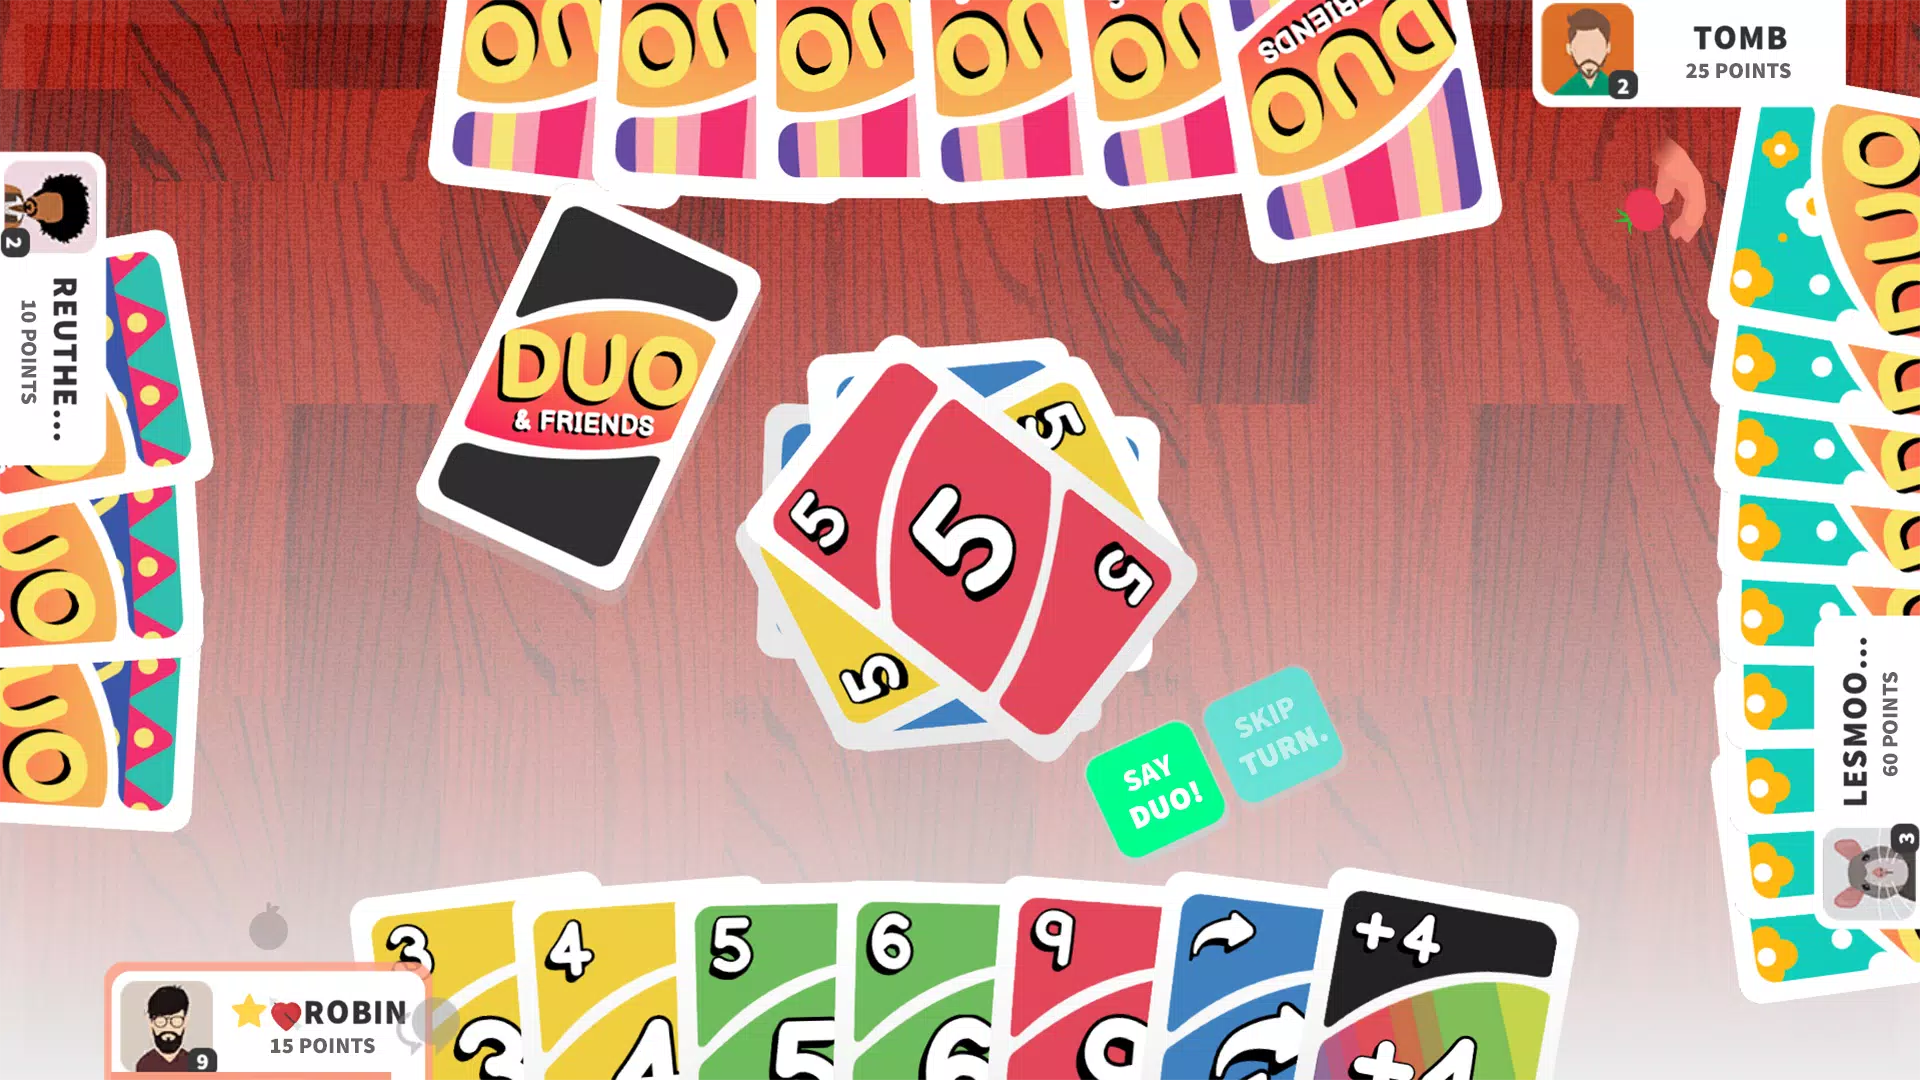 Uno Online - Play Game Online